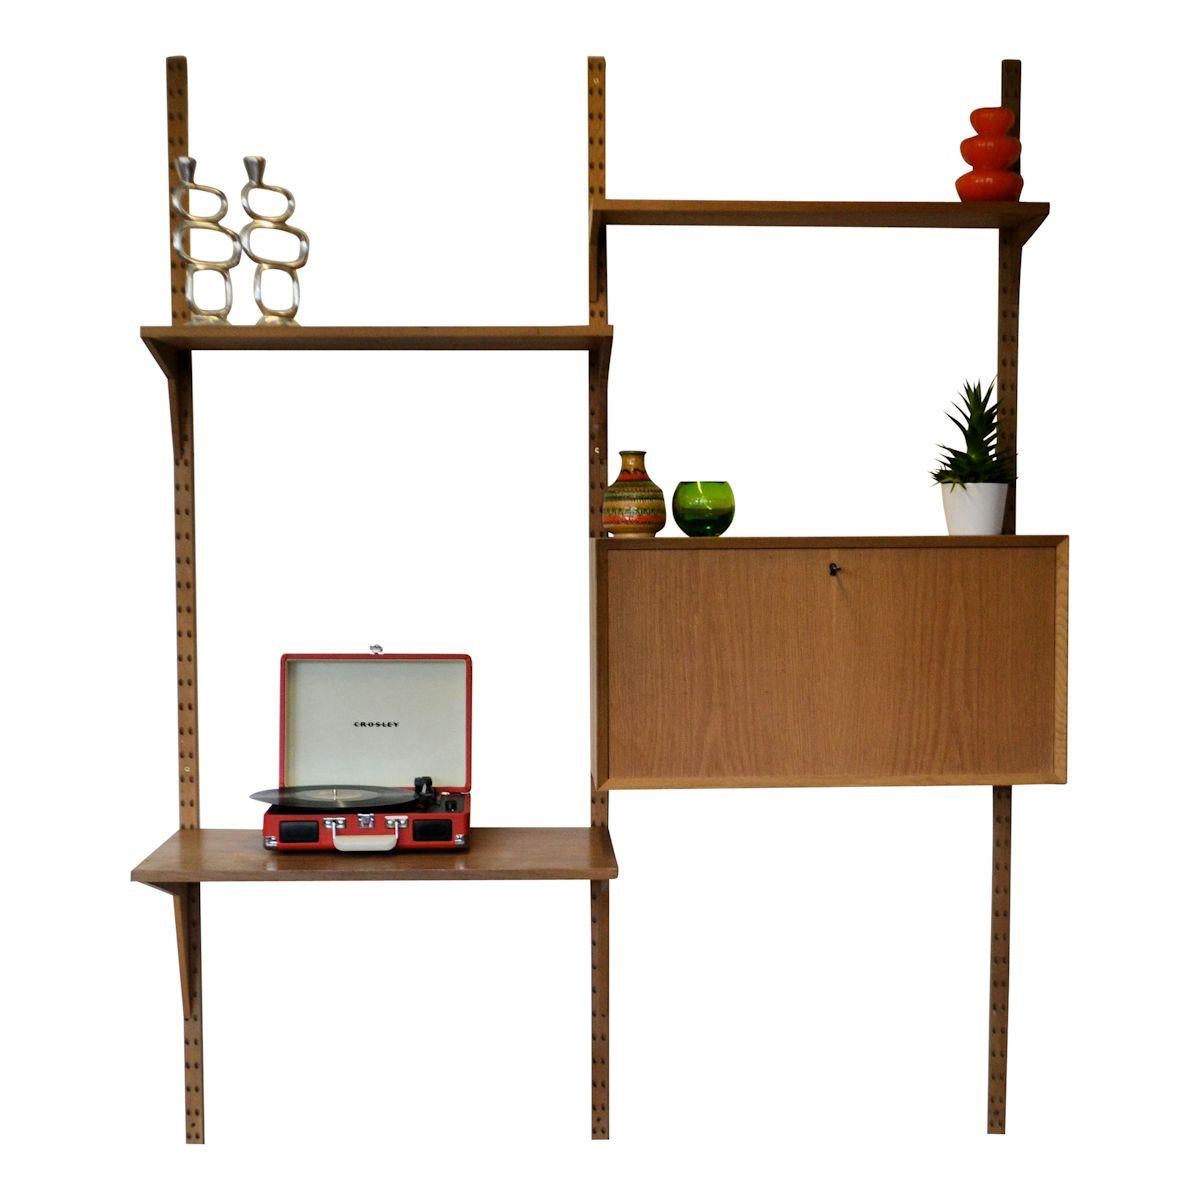 Vintage Danish oak shelving system designed by Poul Cadovius for Cado. Cadovius, the architect and furniture designer, became world famous with his mythical Royal System design. Even today, this practical, efficient, stylish wall system still is a